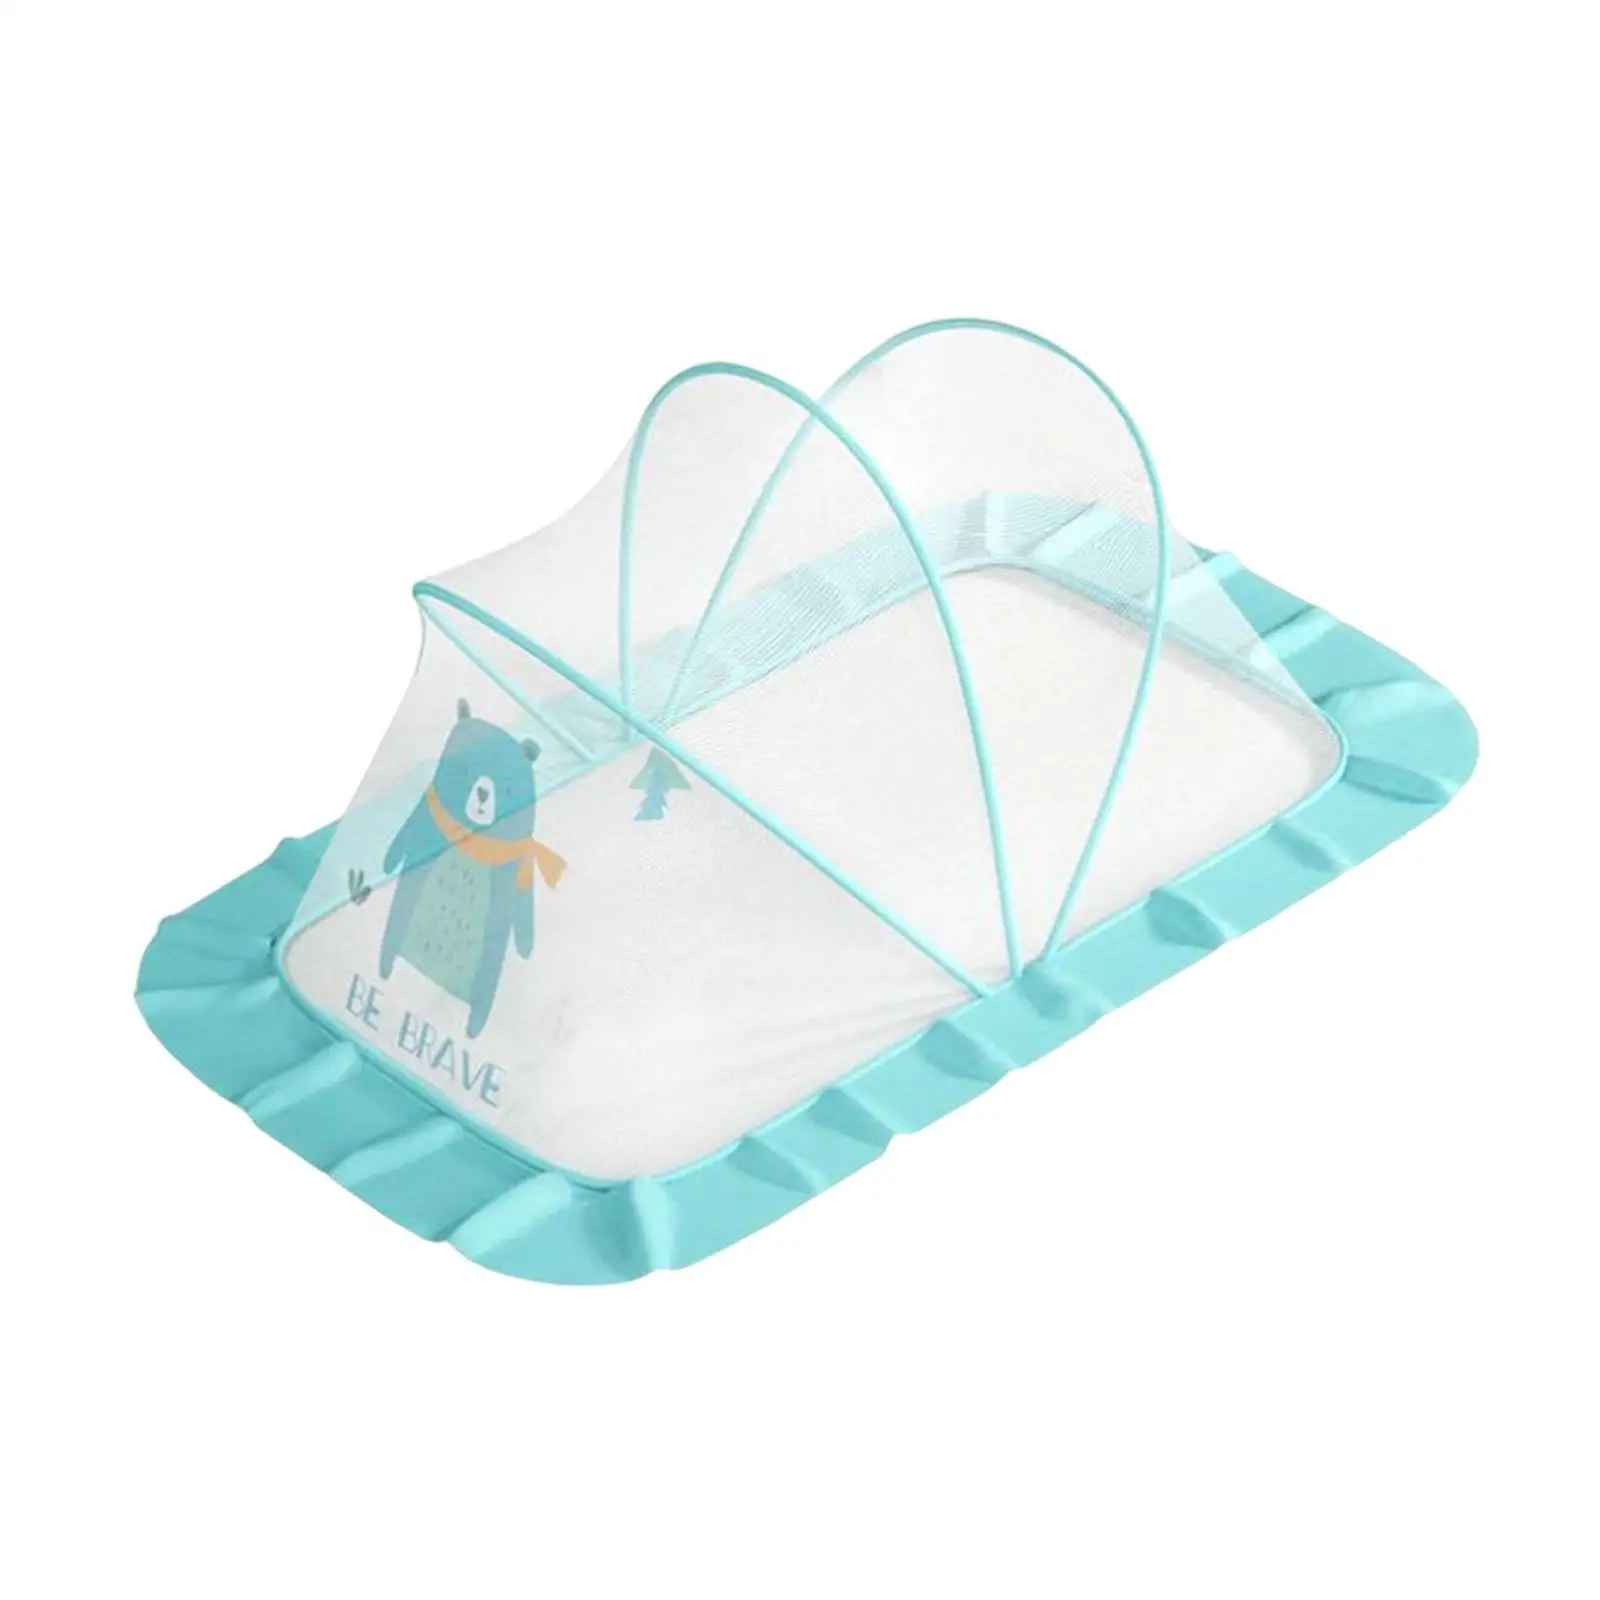 Portable Net Tent High Density Grids Lightweight Bed Cover Bottomless Folding for Baby Crawling Mats Toddlers